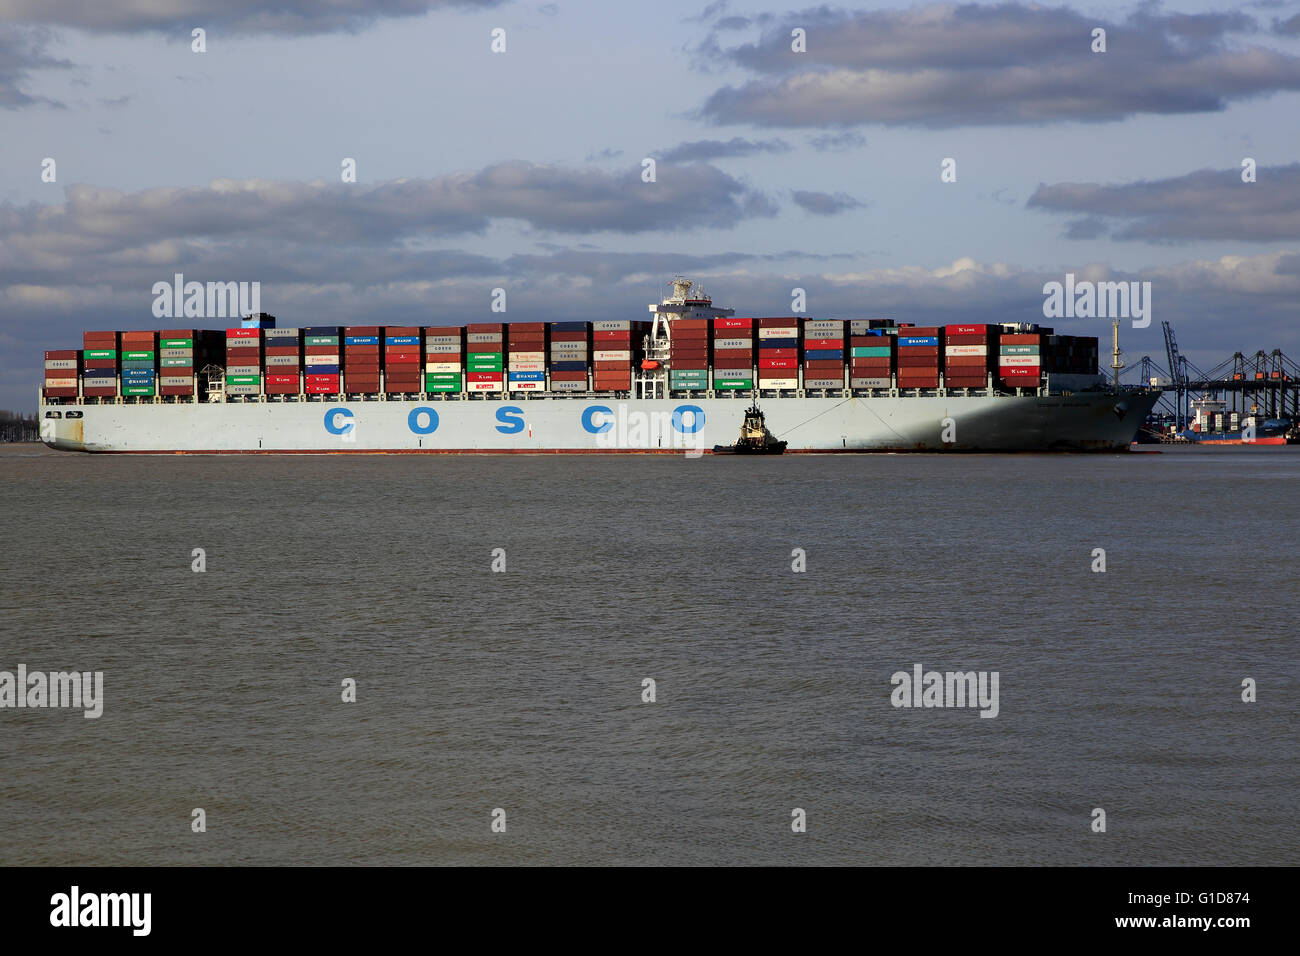 Cosco shipping line container ship arriving at Port of Felixstowe, Suffolk, England, UK Stock Photo